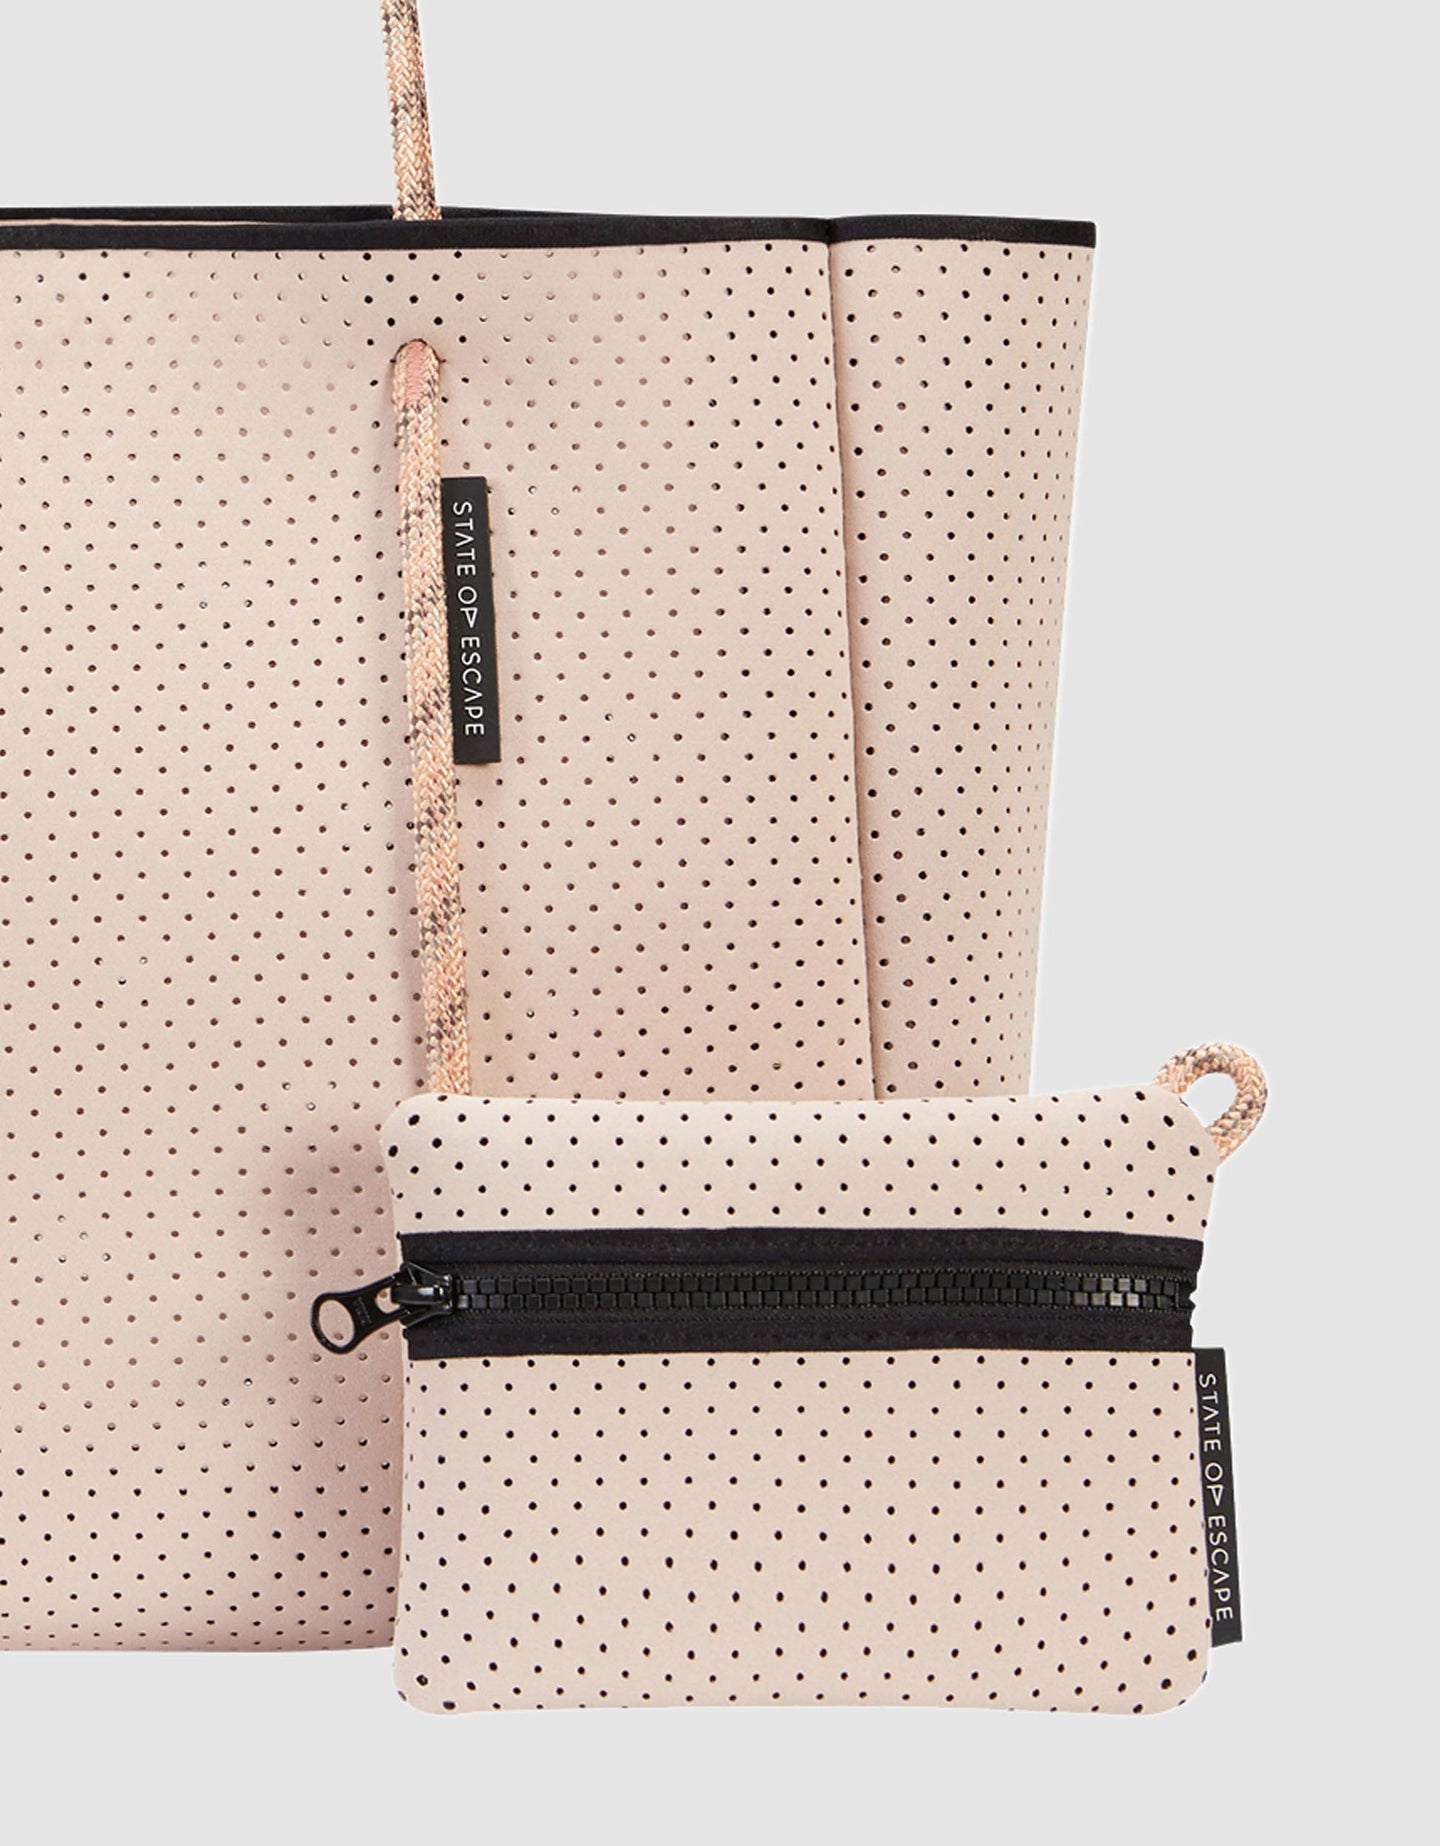 Flying Solo tote in blush